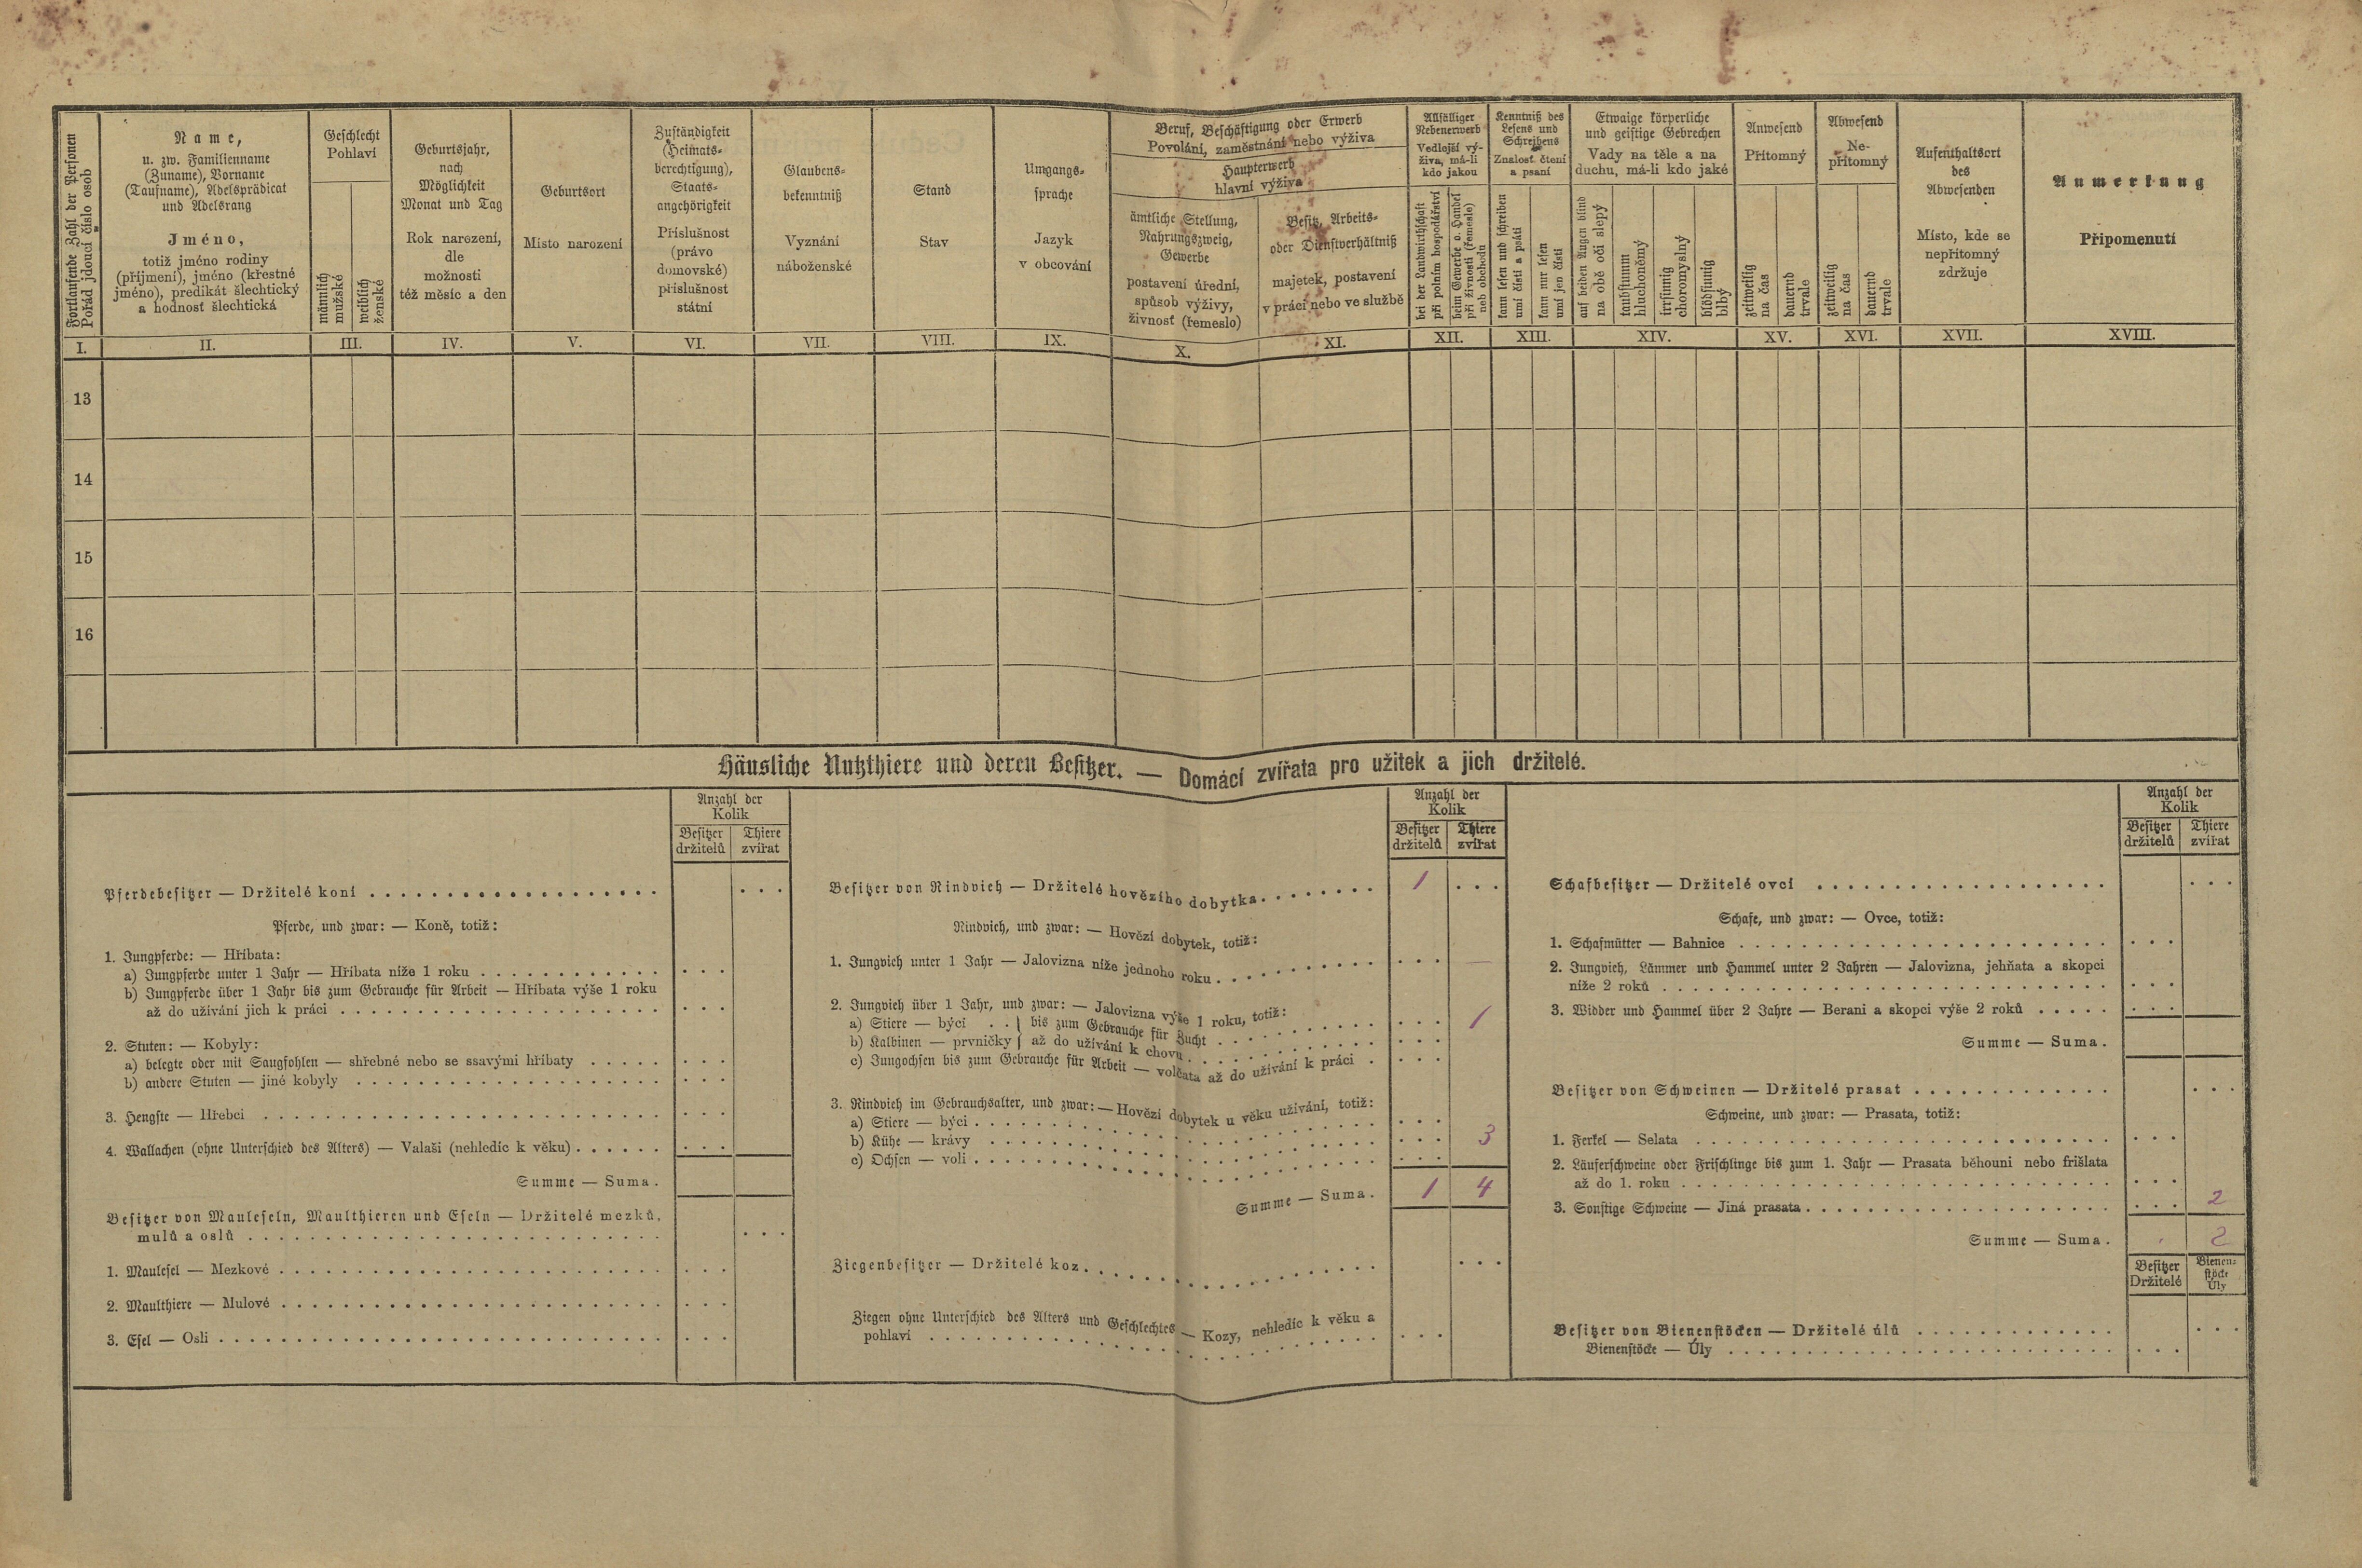 2. soap-pj_00302_census-1880-rence-cp028_0020